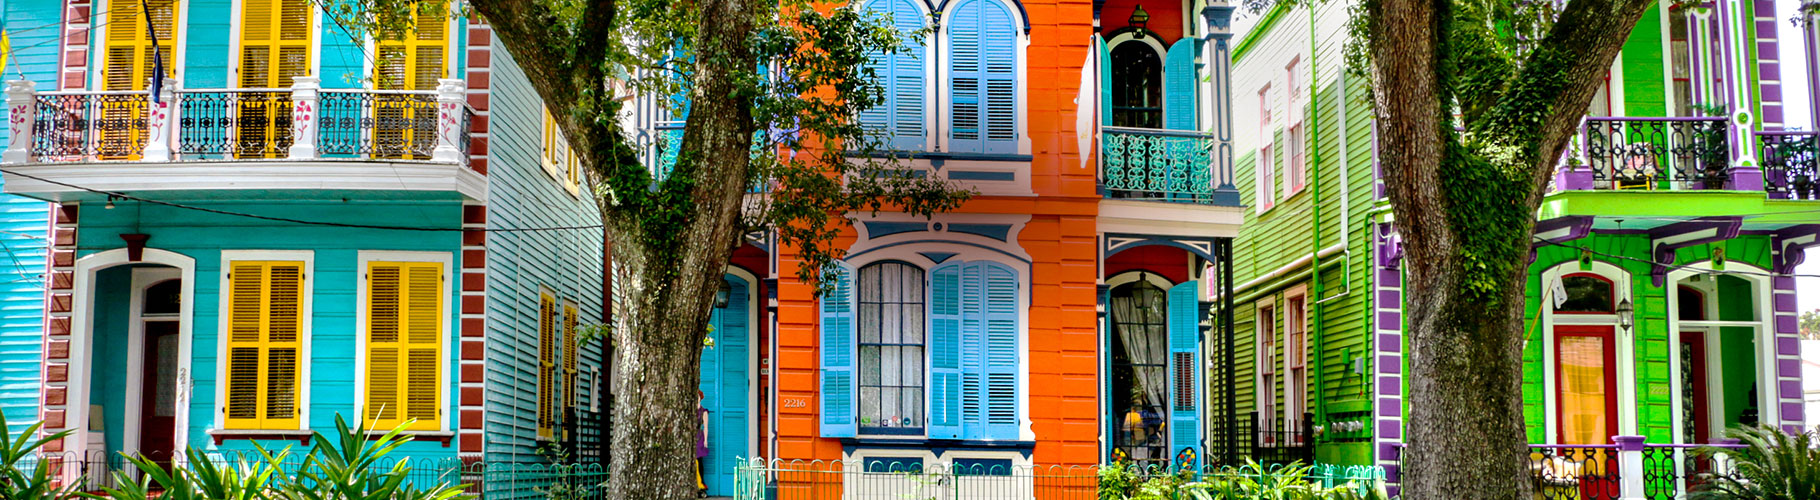 Garden District houses in New Orleans